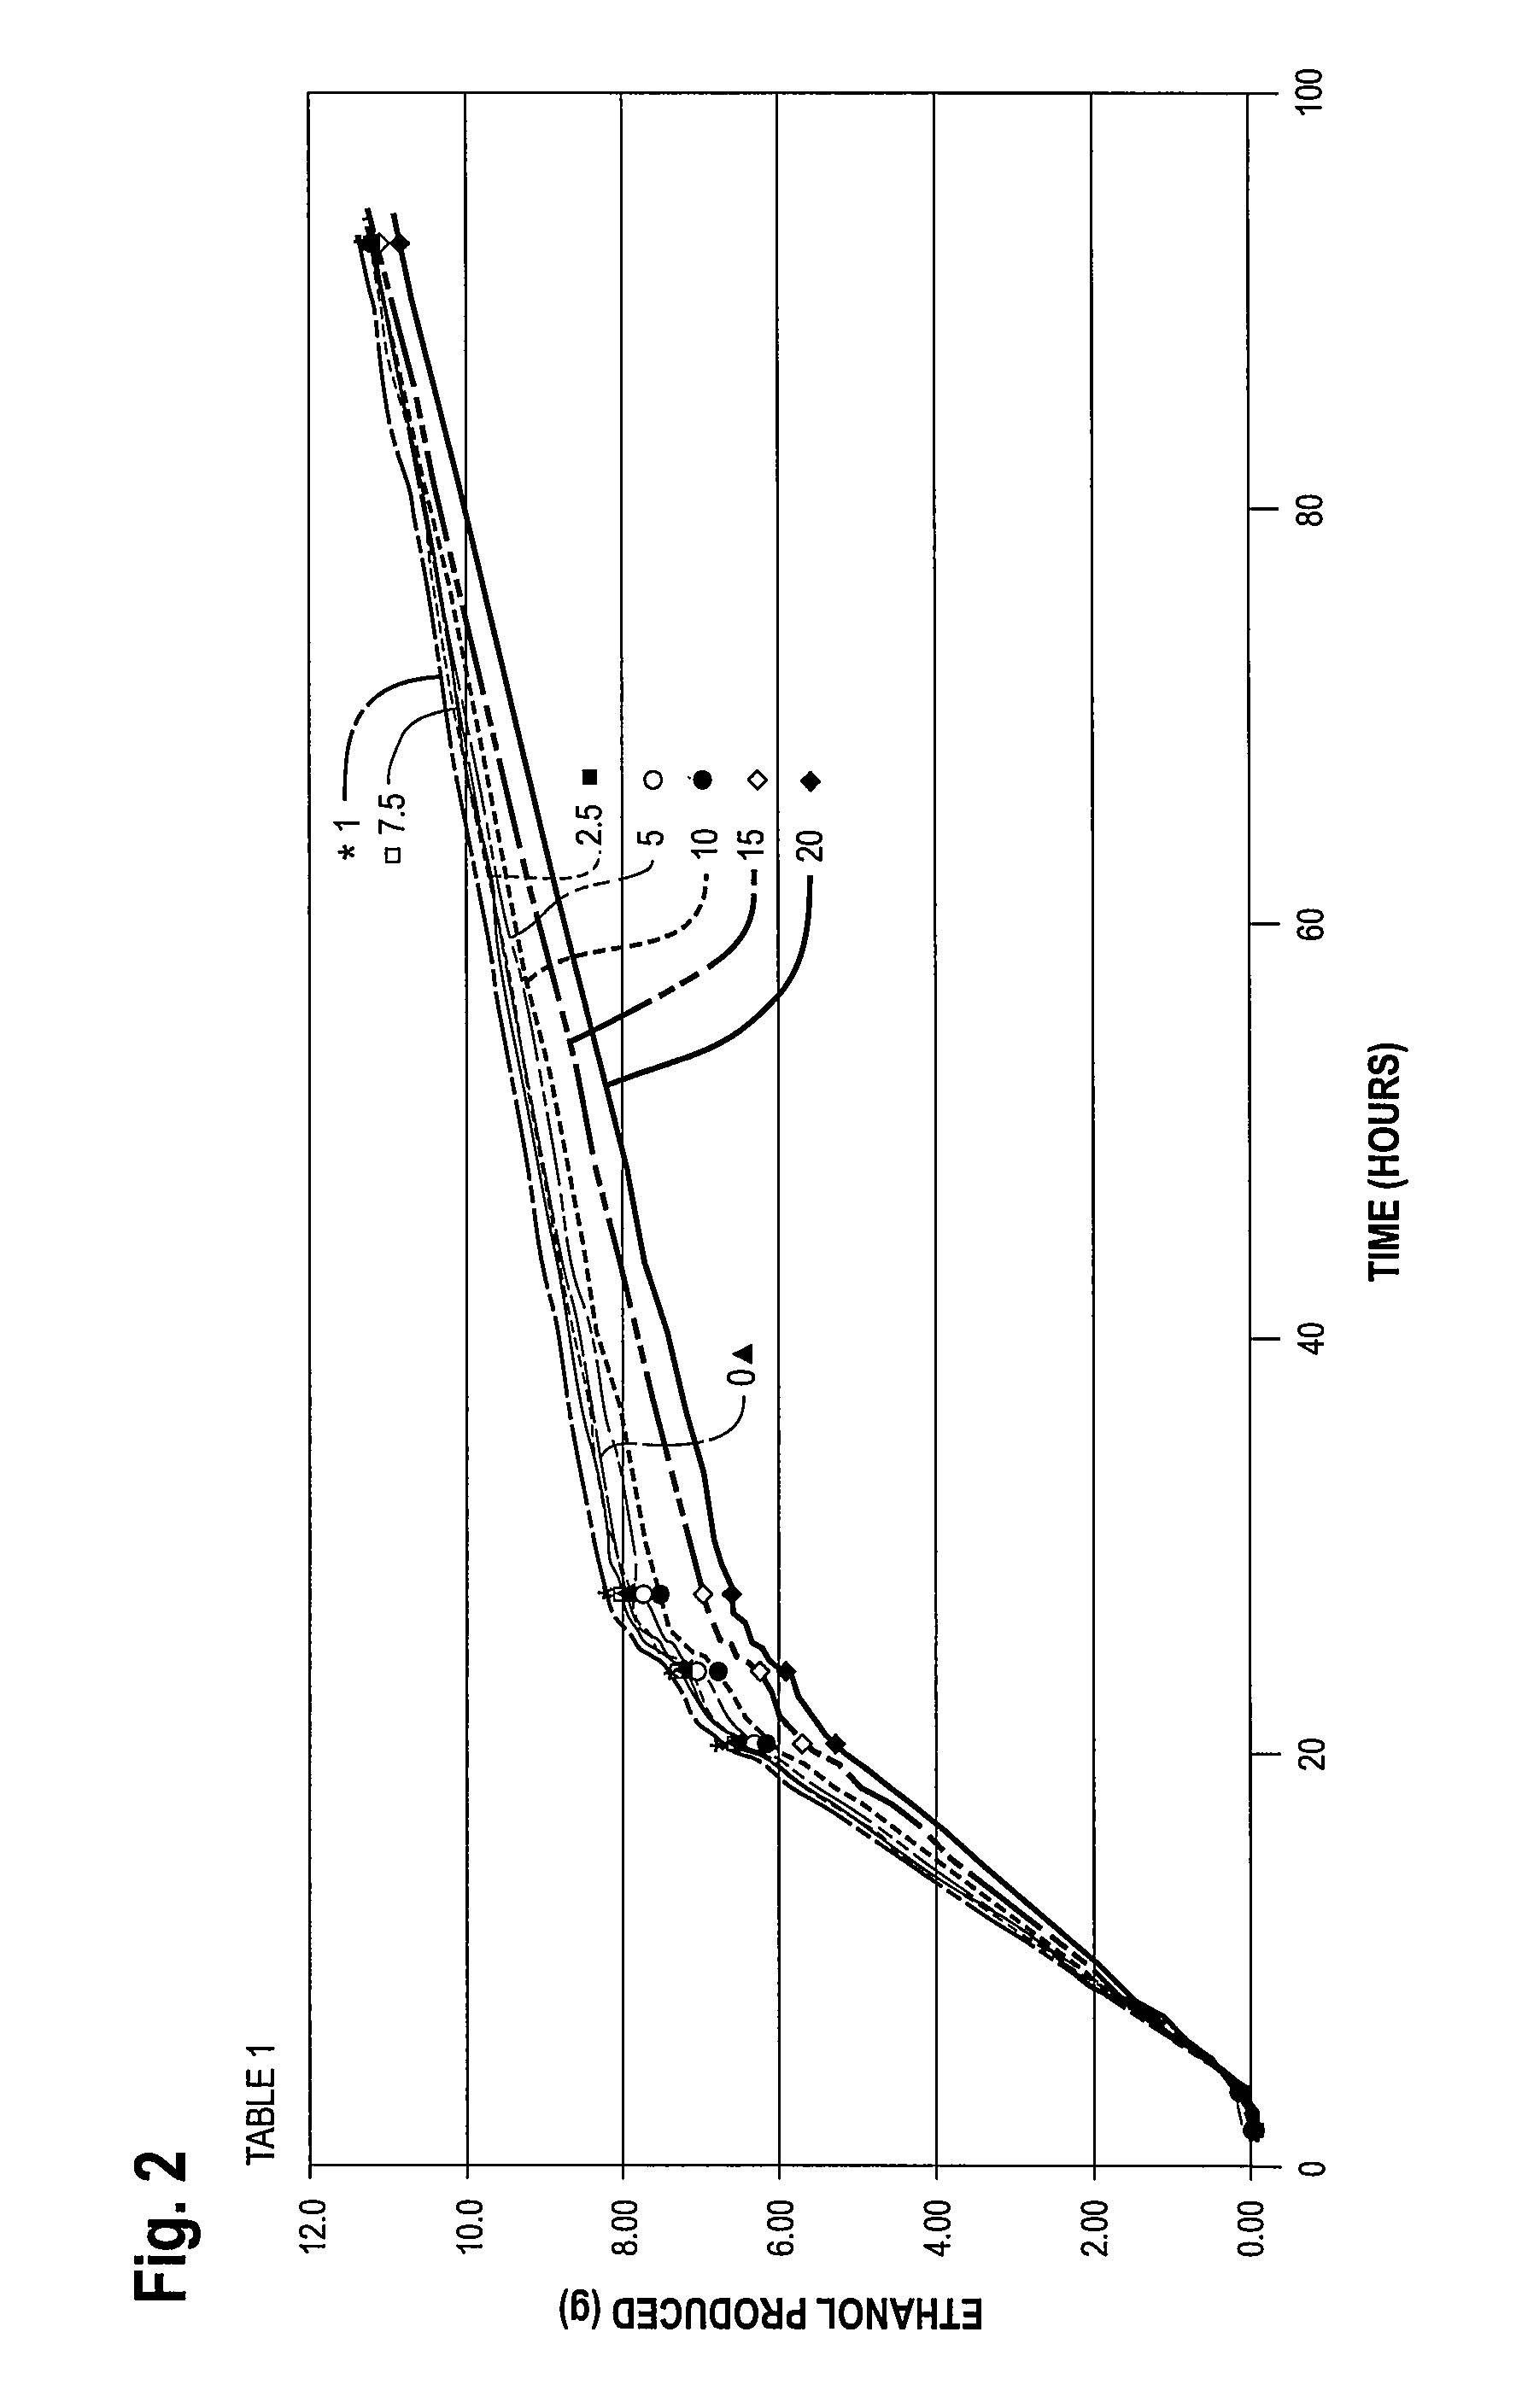 Apparatus and method for treatment of microorganisms during propagation, conditioning and fermentation